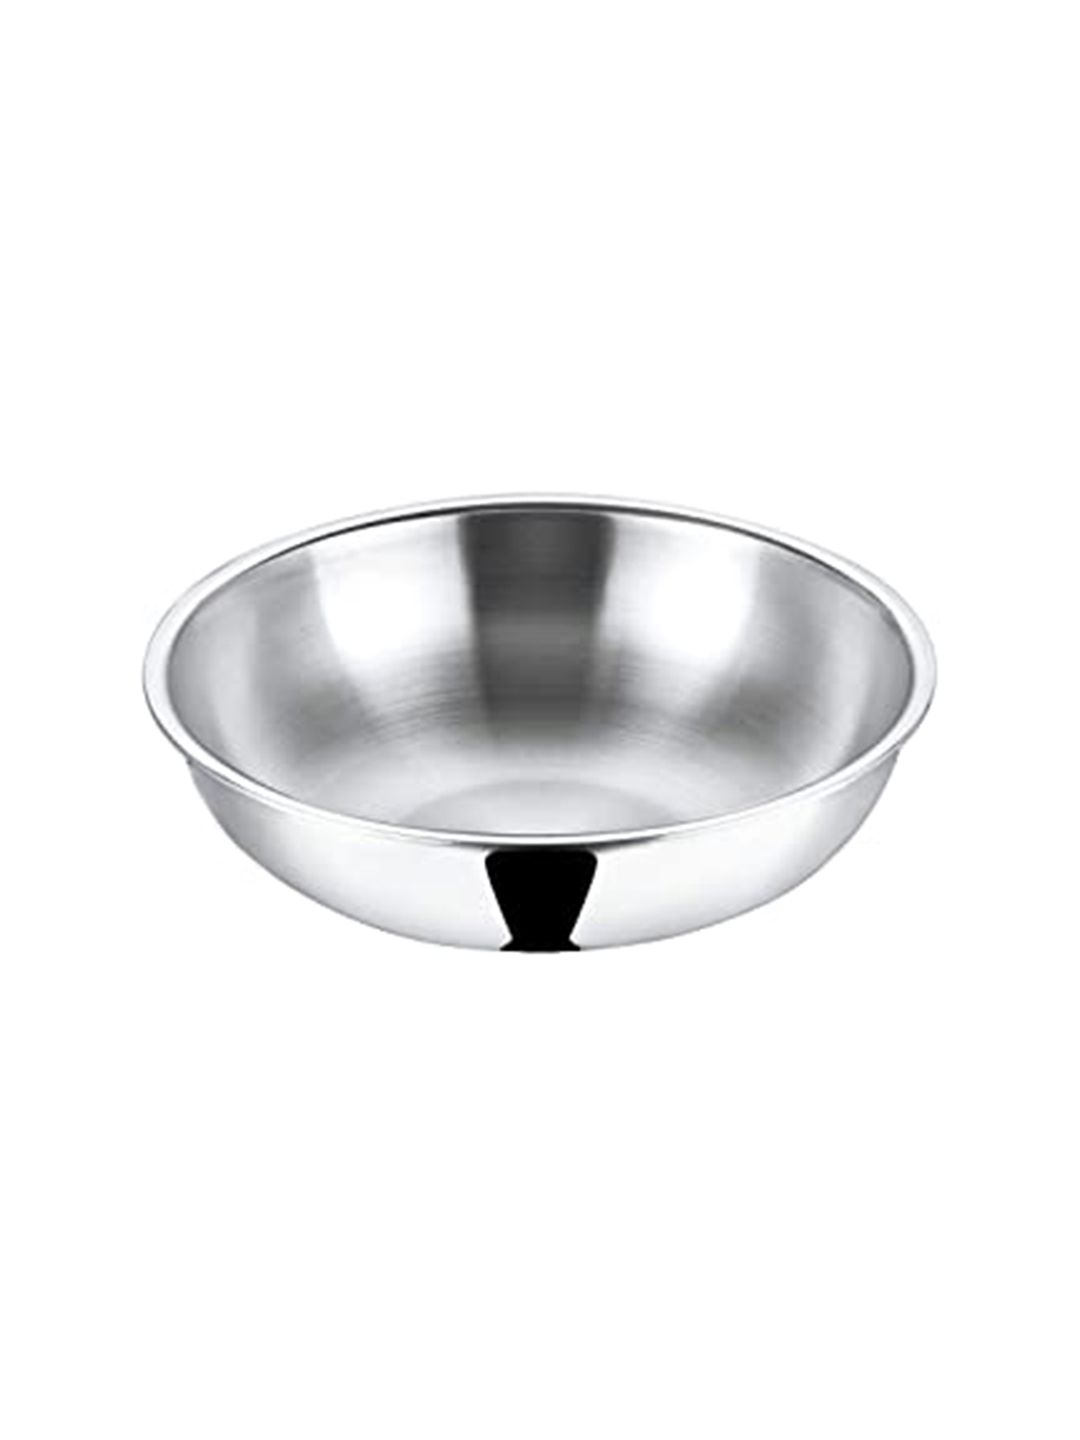 Vinod Silver Tri-Ply Stainless Steel Induction Tasra Price in India